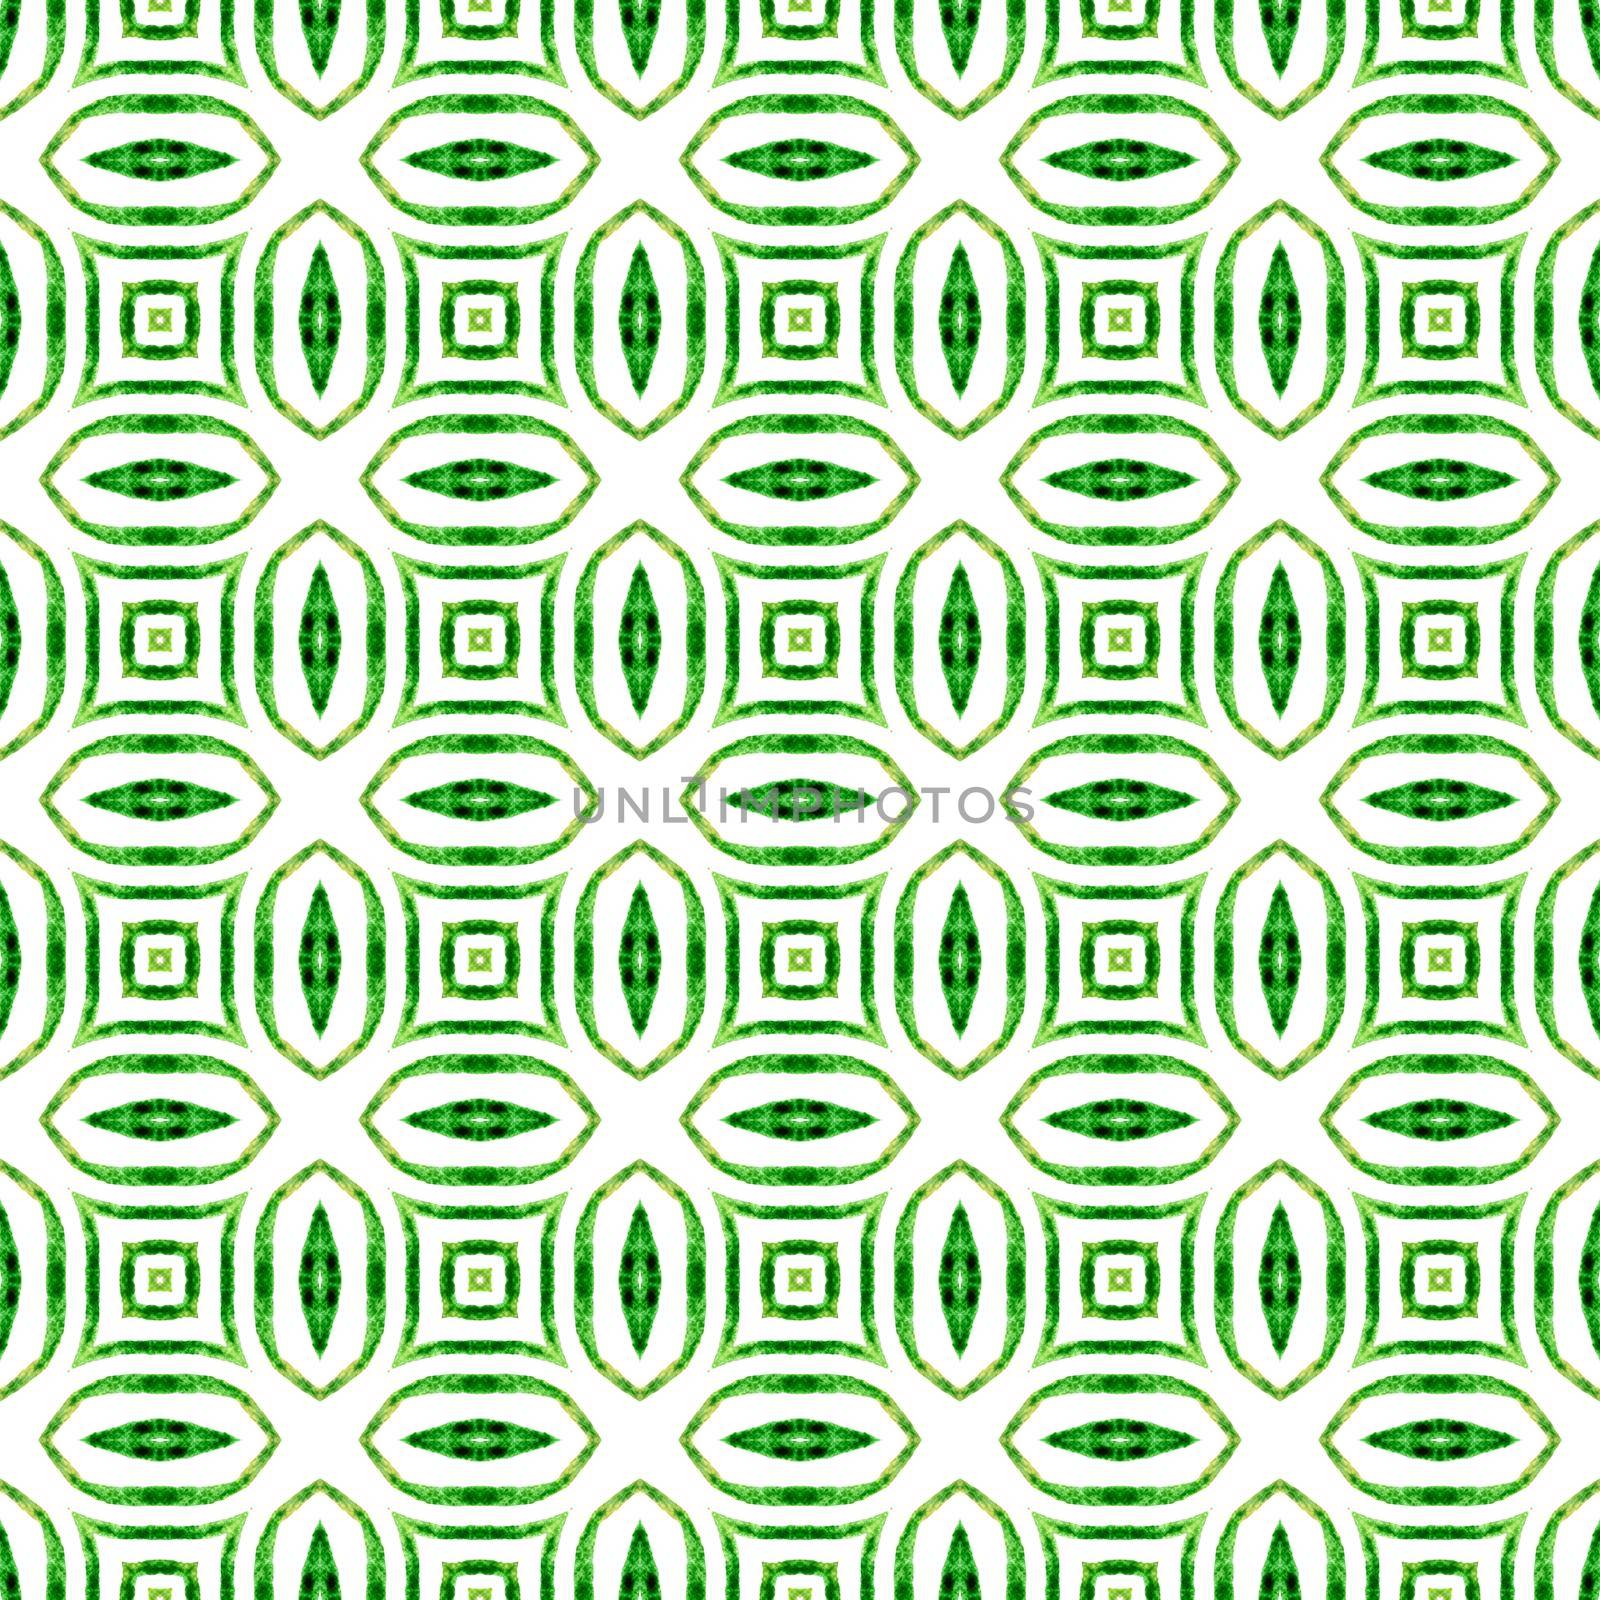 Striped hand drawn design. Green authentic boho chic summer design. Textile ready fabulous print, swimwear fabric, wallpaper, wrapping. Repeating striped hand drawn border.